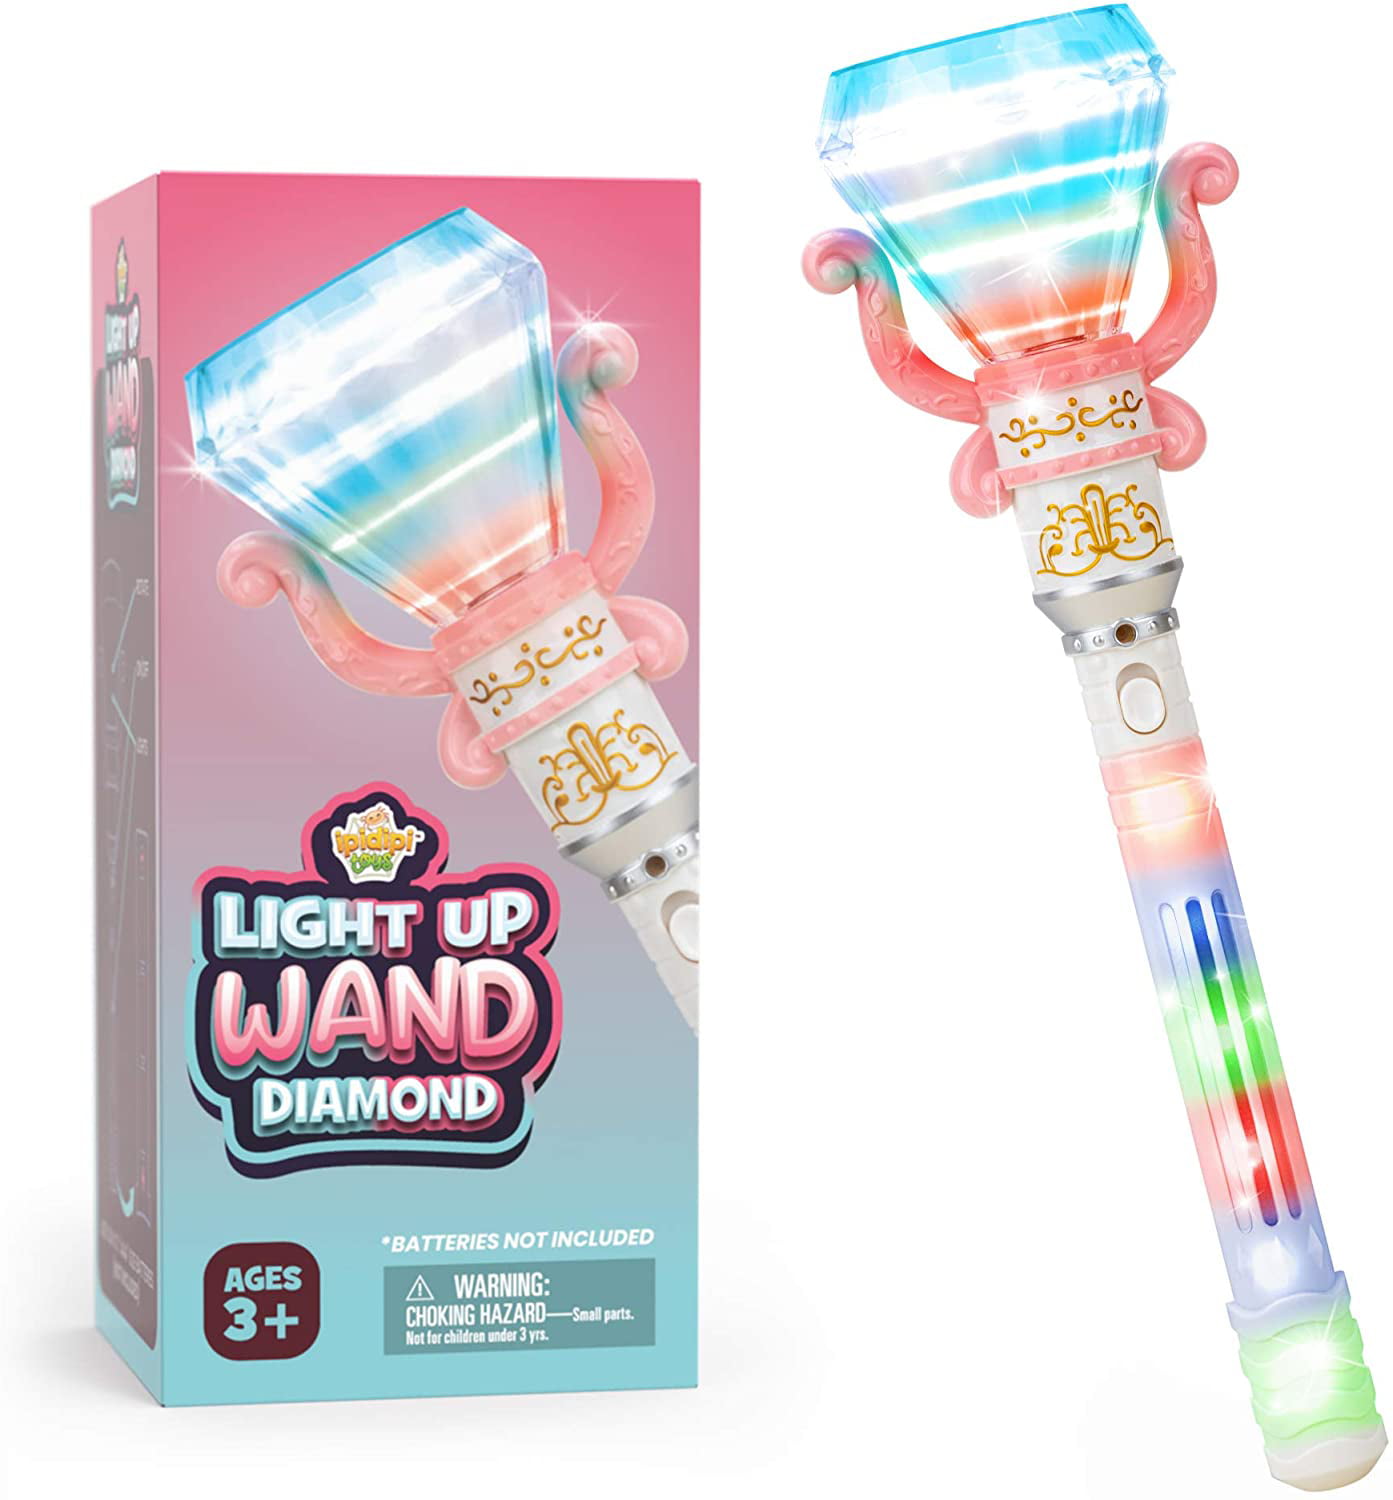 Rotating LED Toy Wand for Boys and Spinning Light-Up Wand for Kids in Gift Box 